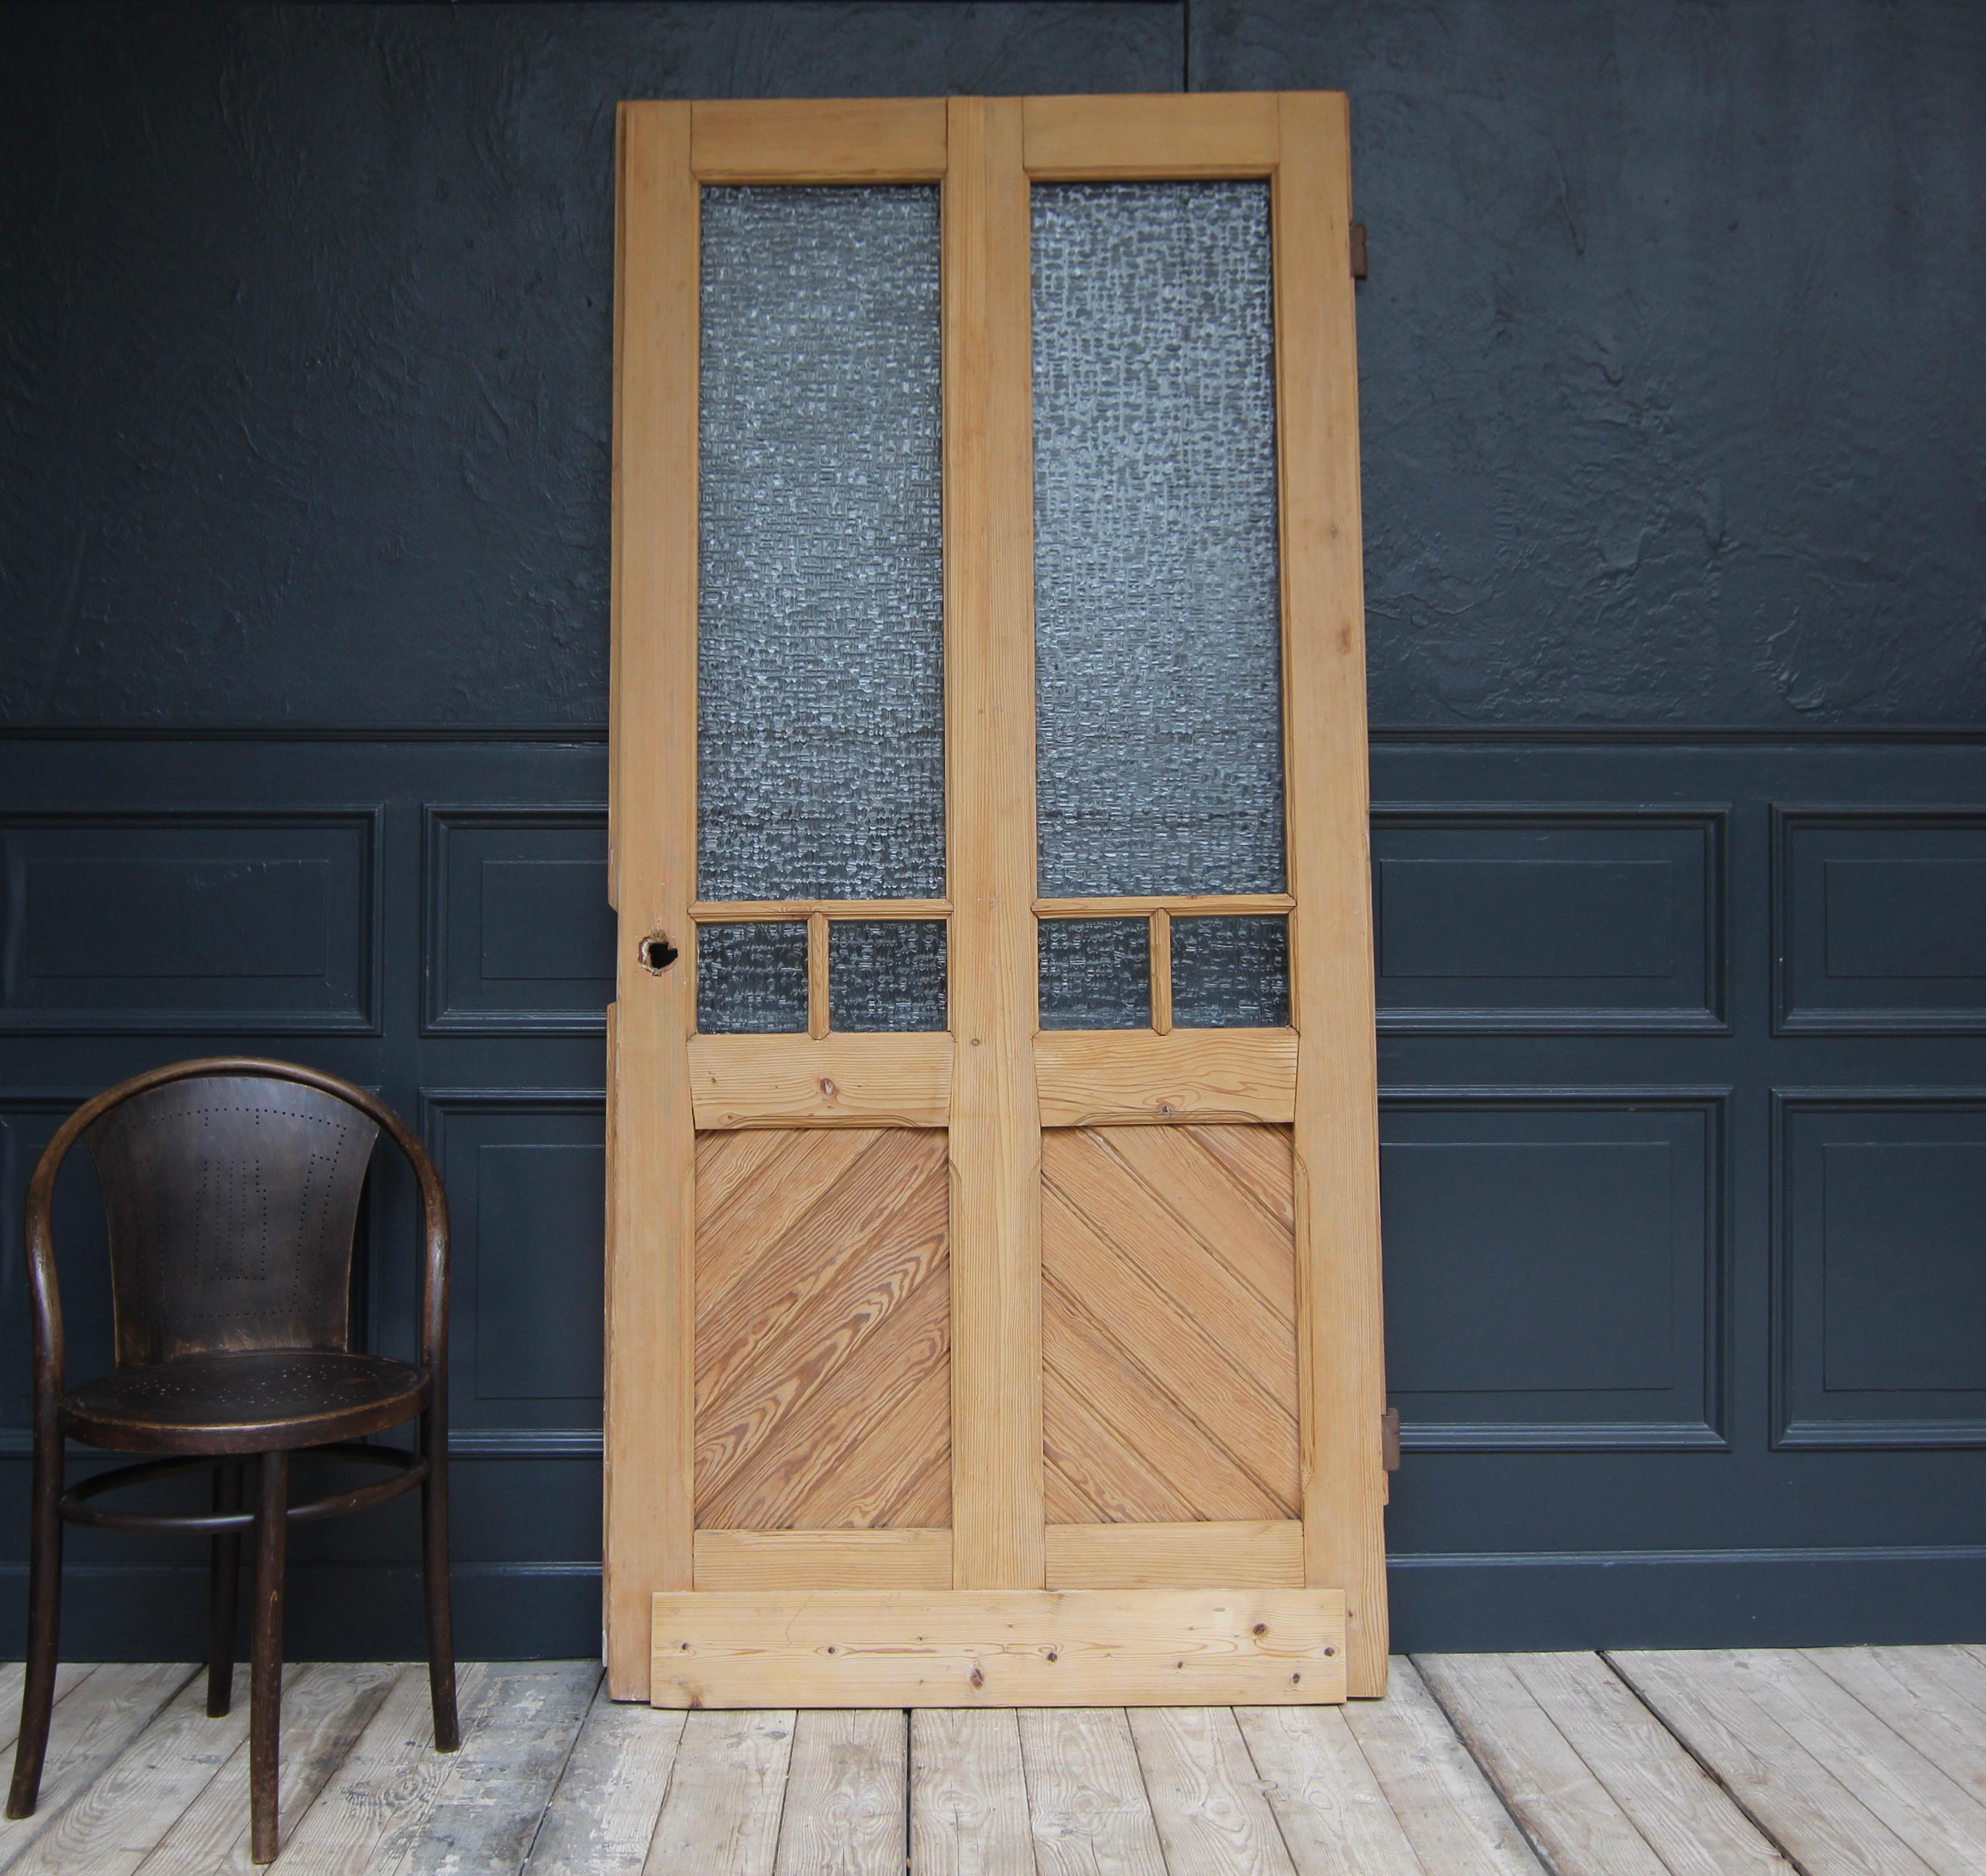 A Art Nouveau door from the early 20th century. Solidly crafted in softwood. 

Frame and panelled construction with ribbed glass and large iron fittings.

Dimensions: 
220 cm high / 86.61 inch high,
104 cm wide / 40.94 inch wide,
3.5 cm deep / 1.37